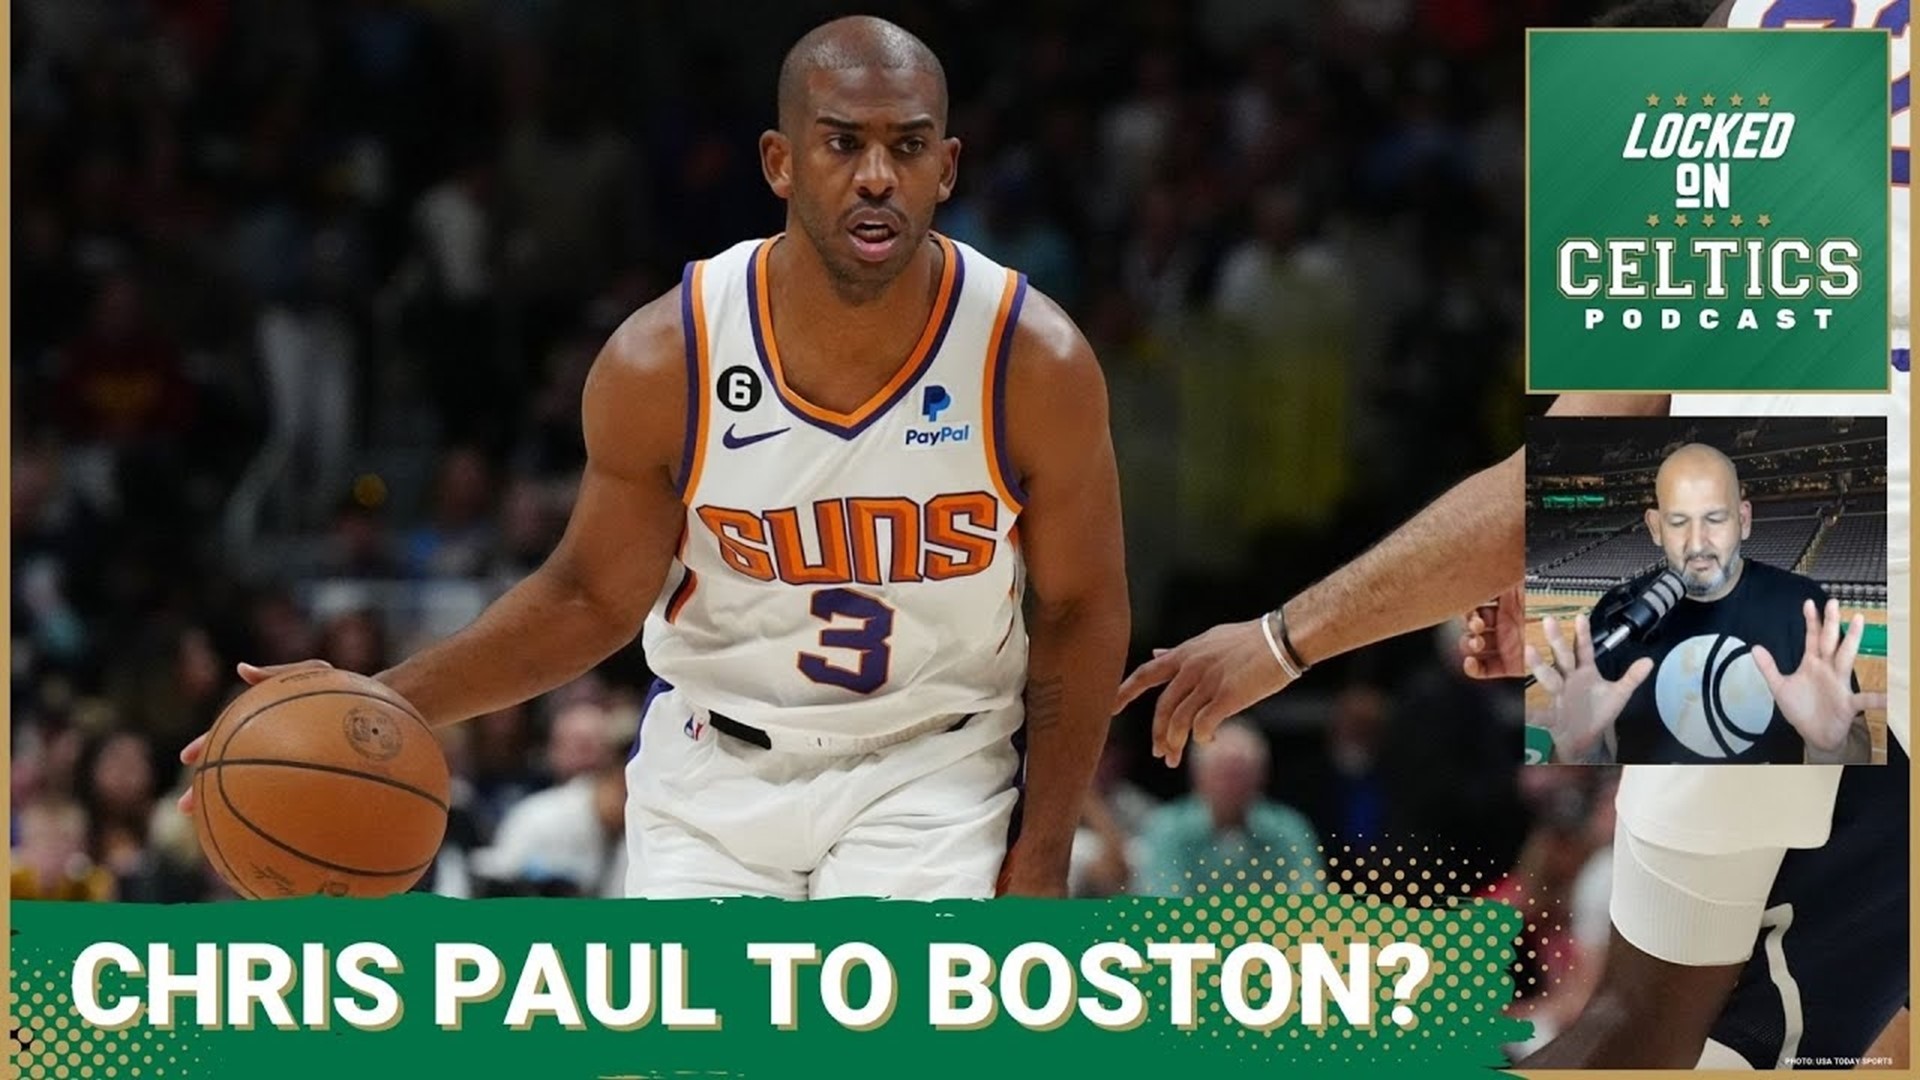 Chris Paul to Boston? Miami loss hurt less? & Mailbag questions on the CBA